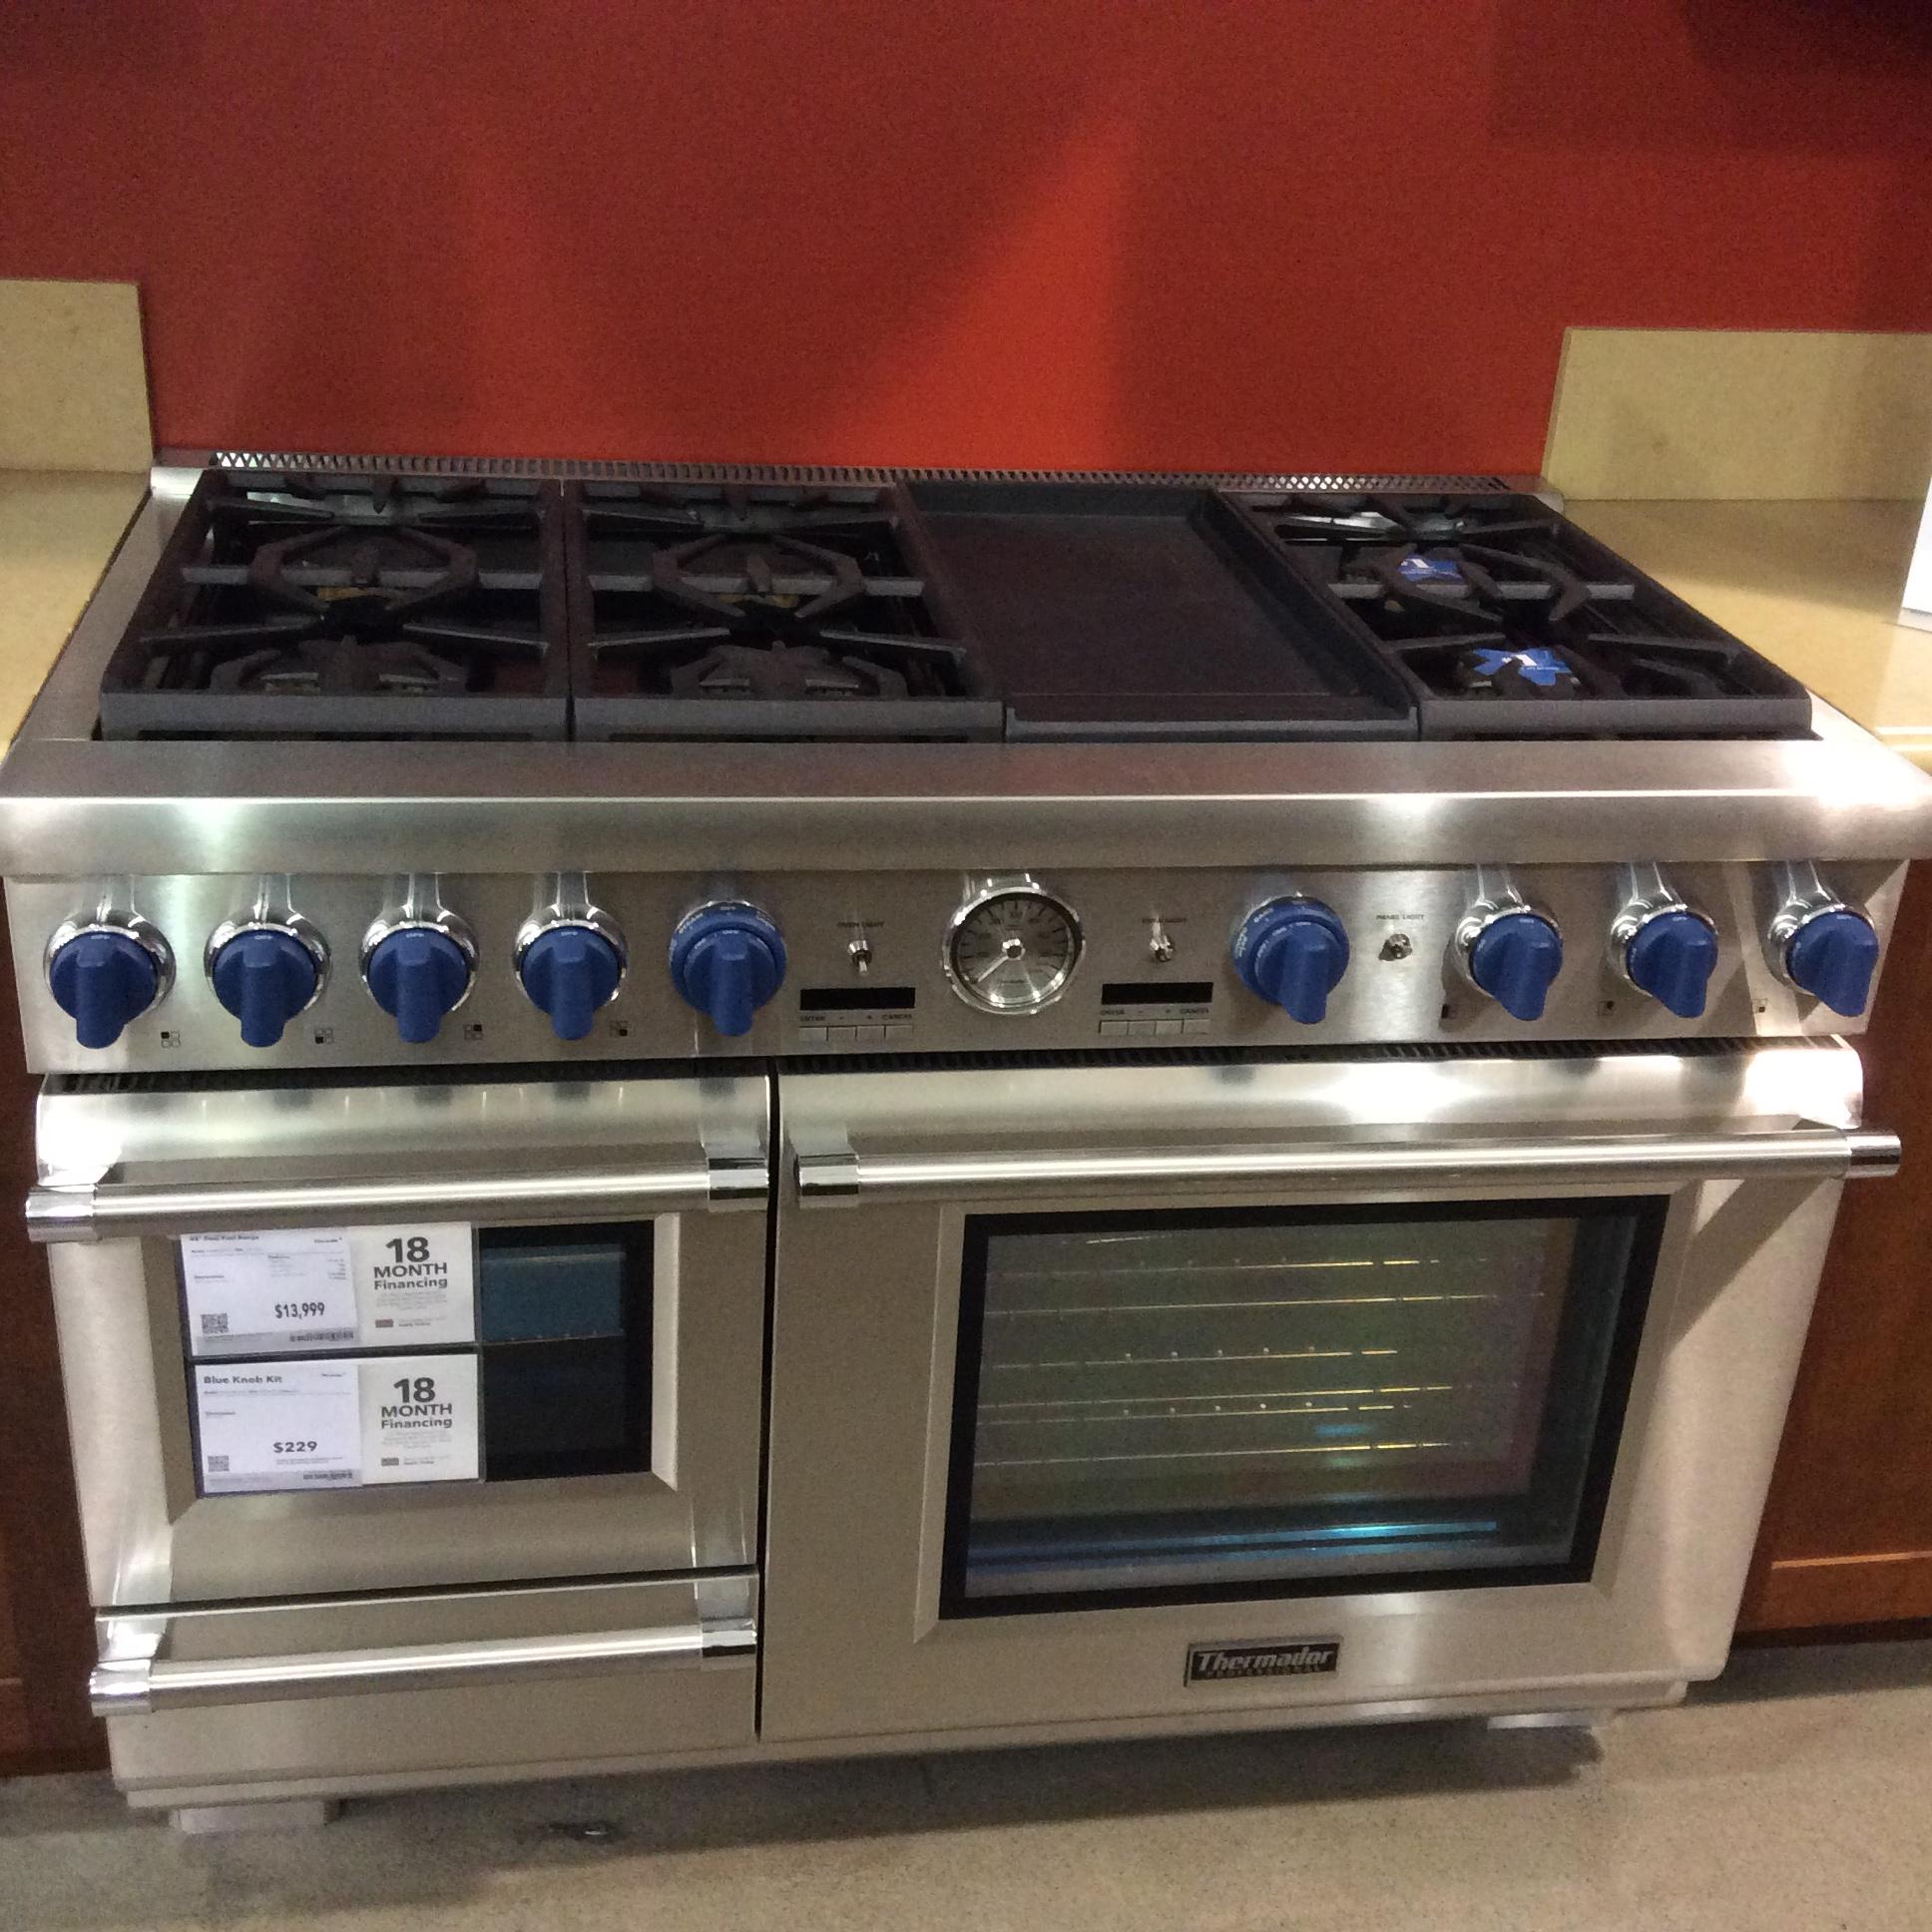 Picture of Kelly's Appliance Center is factory-authorized to service Thermador appliances like this kitchen range. - Kelly's Appliance Center